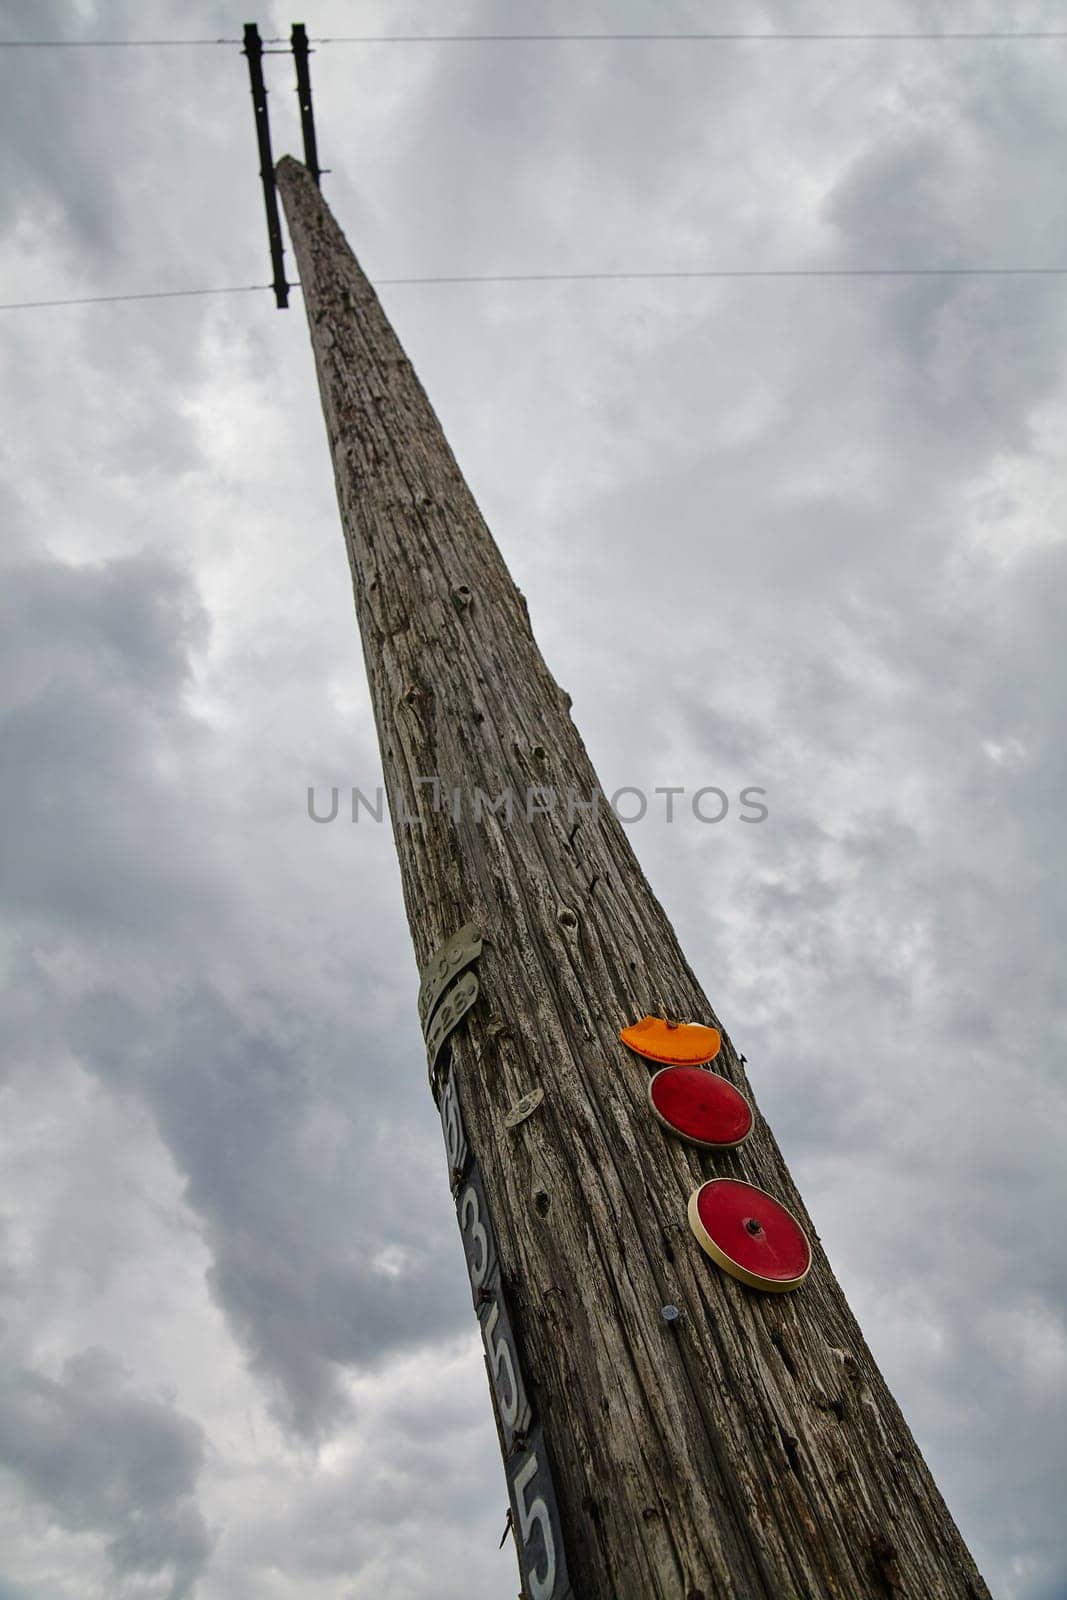 Rugged utility pole with reflective markers against cloudy sky, symbolizing connectivity and resilience in the face of natural forces. Perfect for industries related to infrastructure, telecommunications, and weathering adversity.